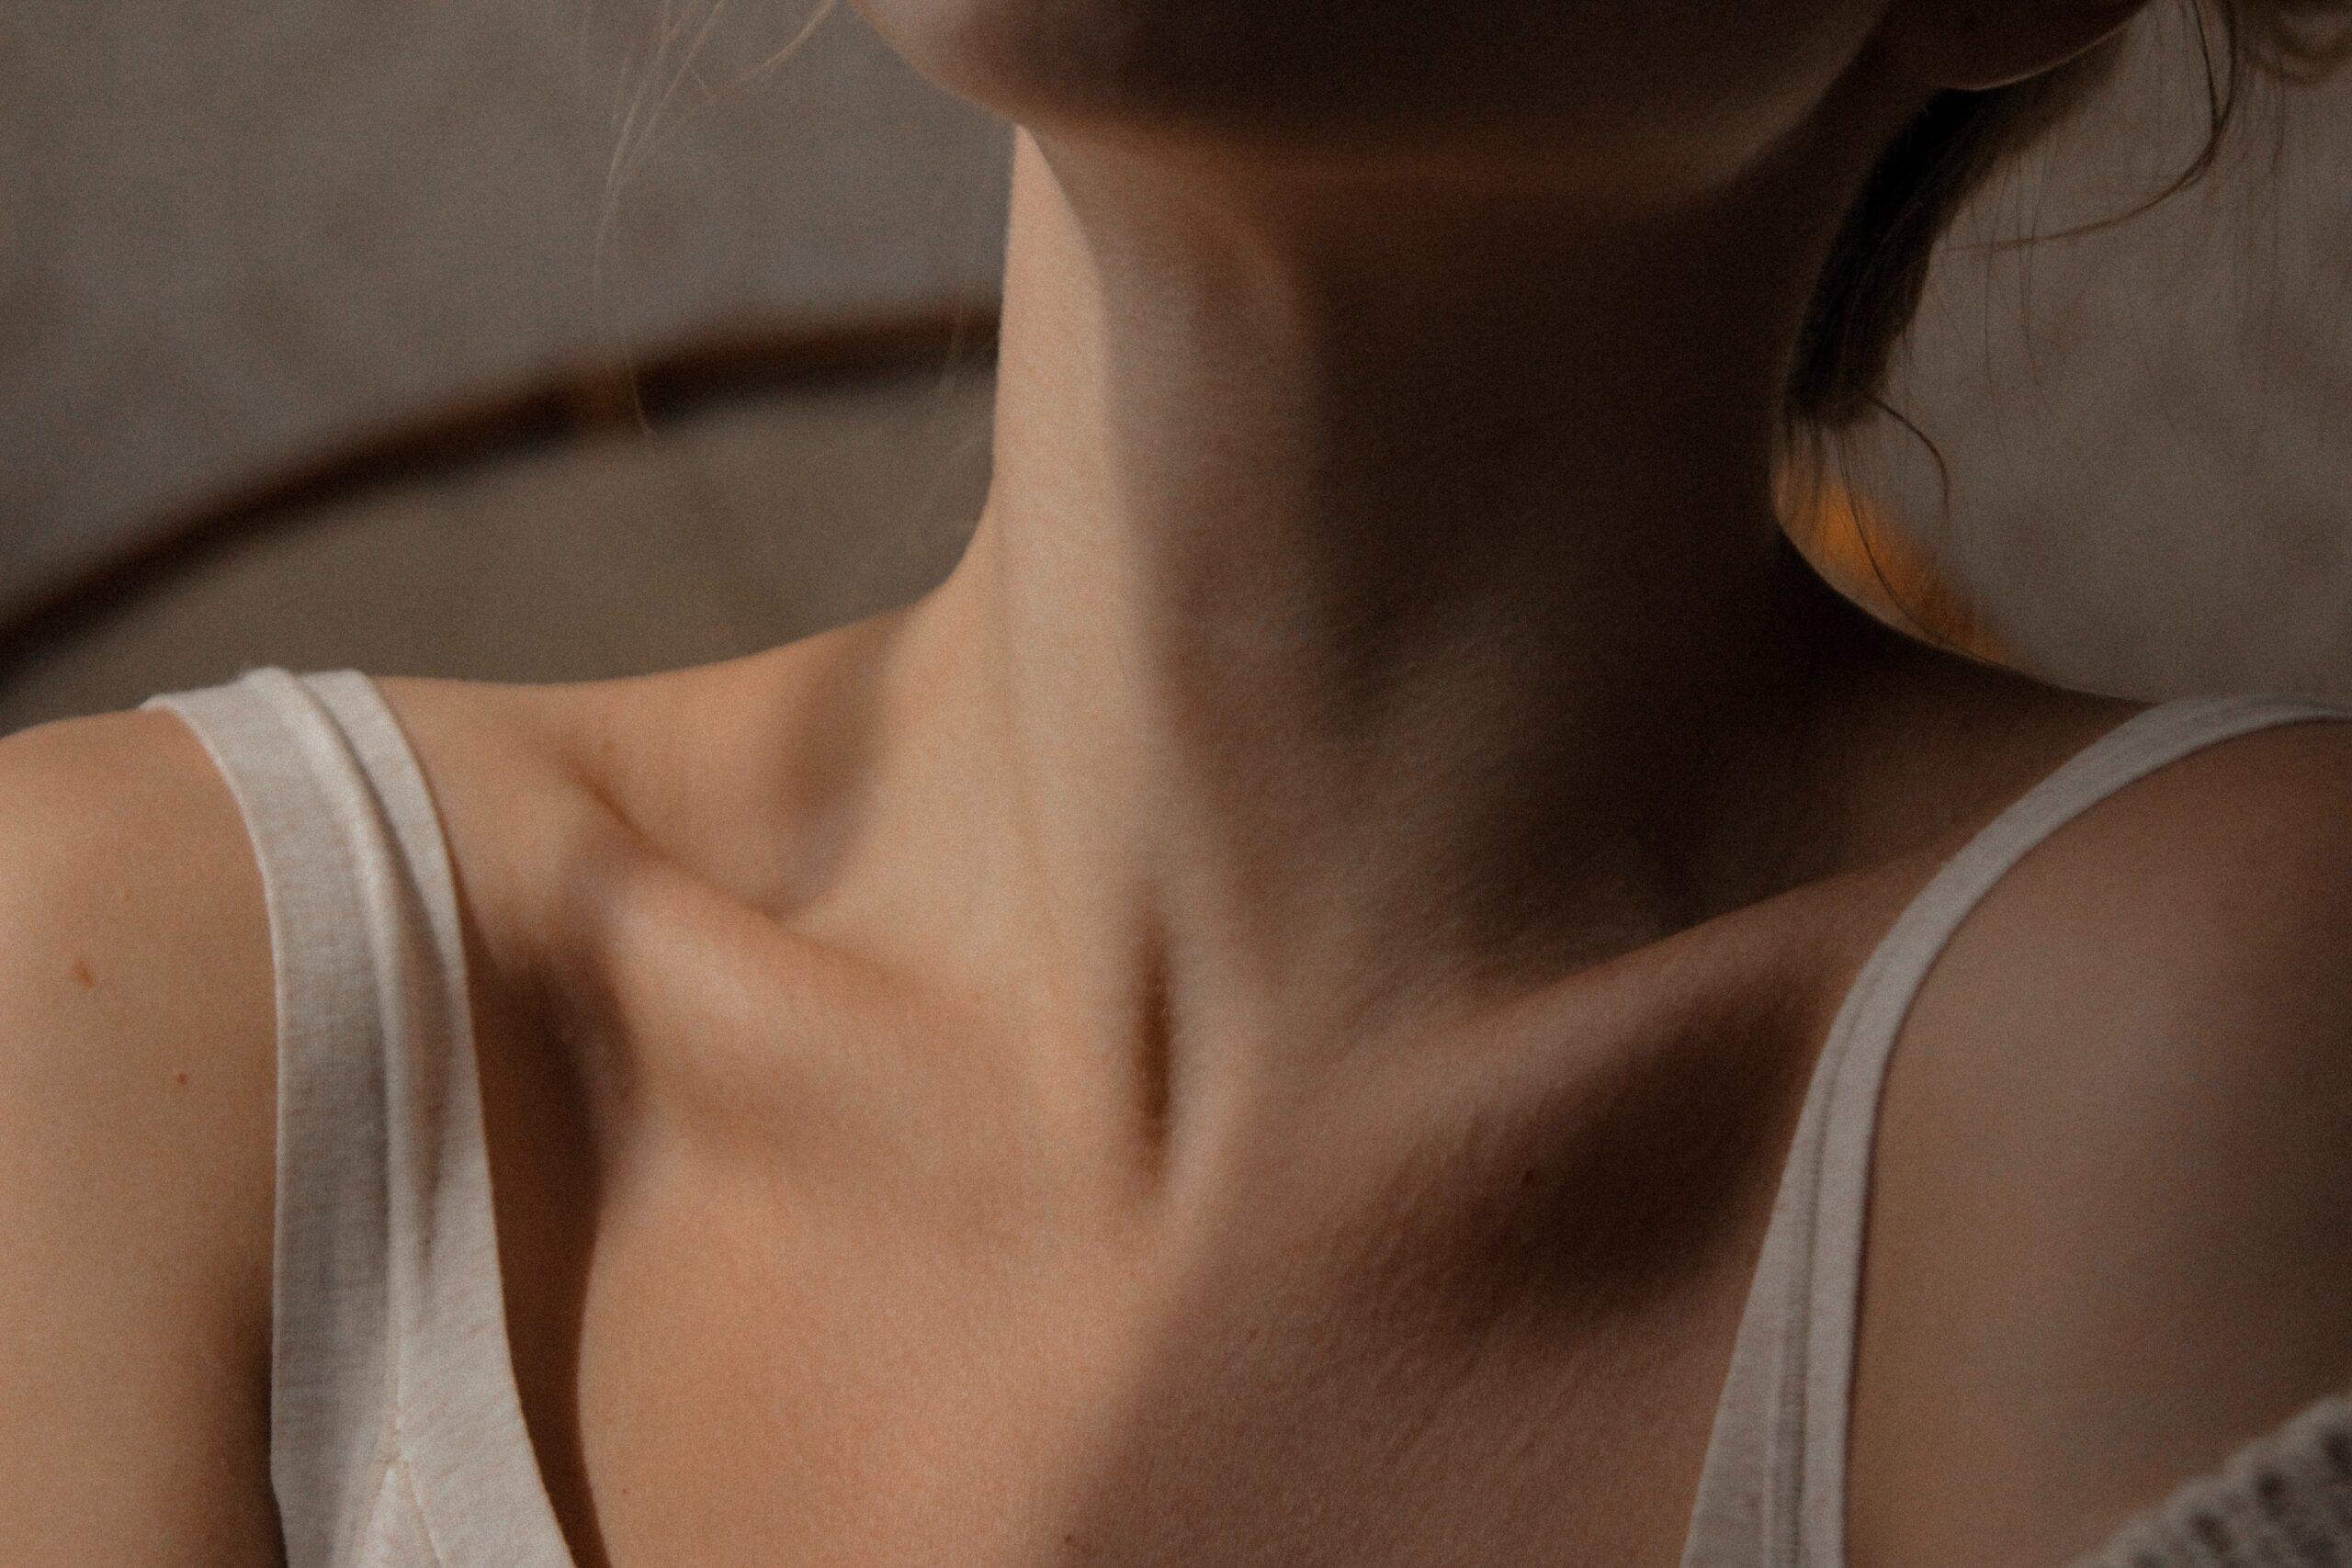 Woman wearing a white tank top exposing her collar bones and neck